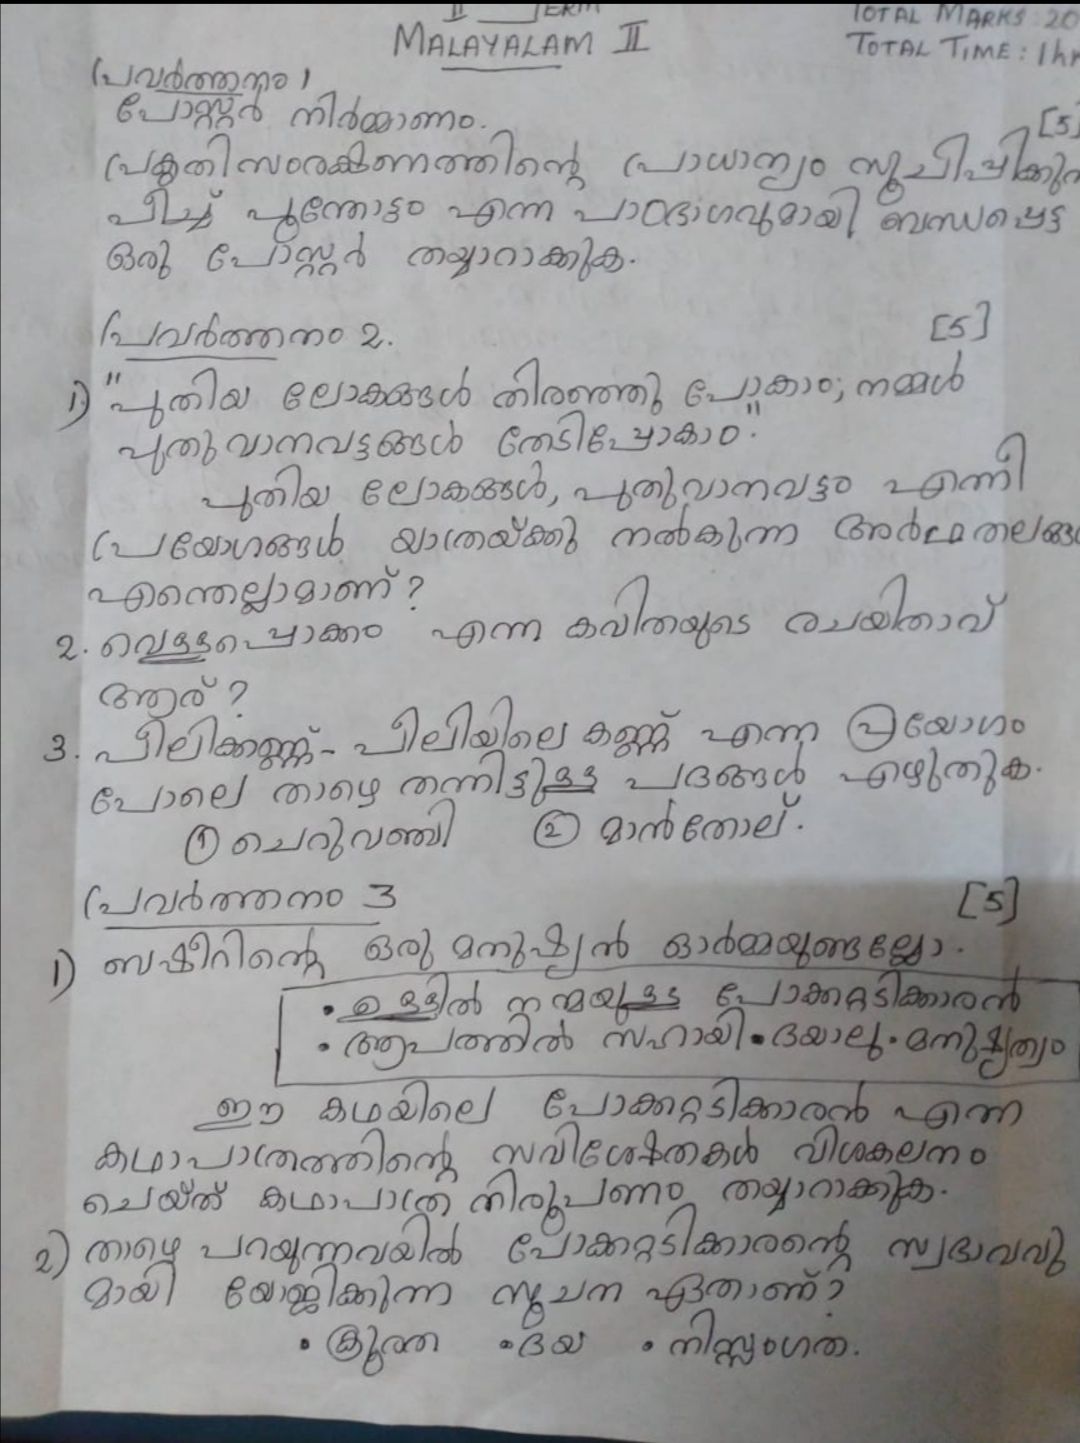 assignment written in malayalam